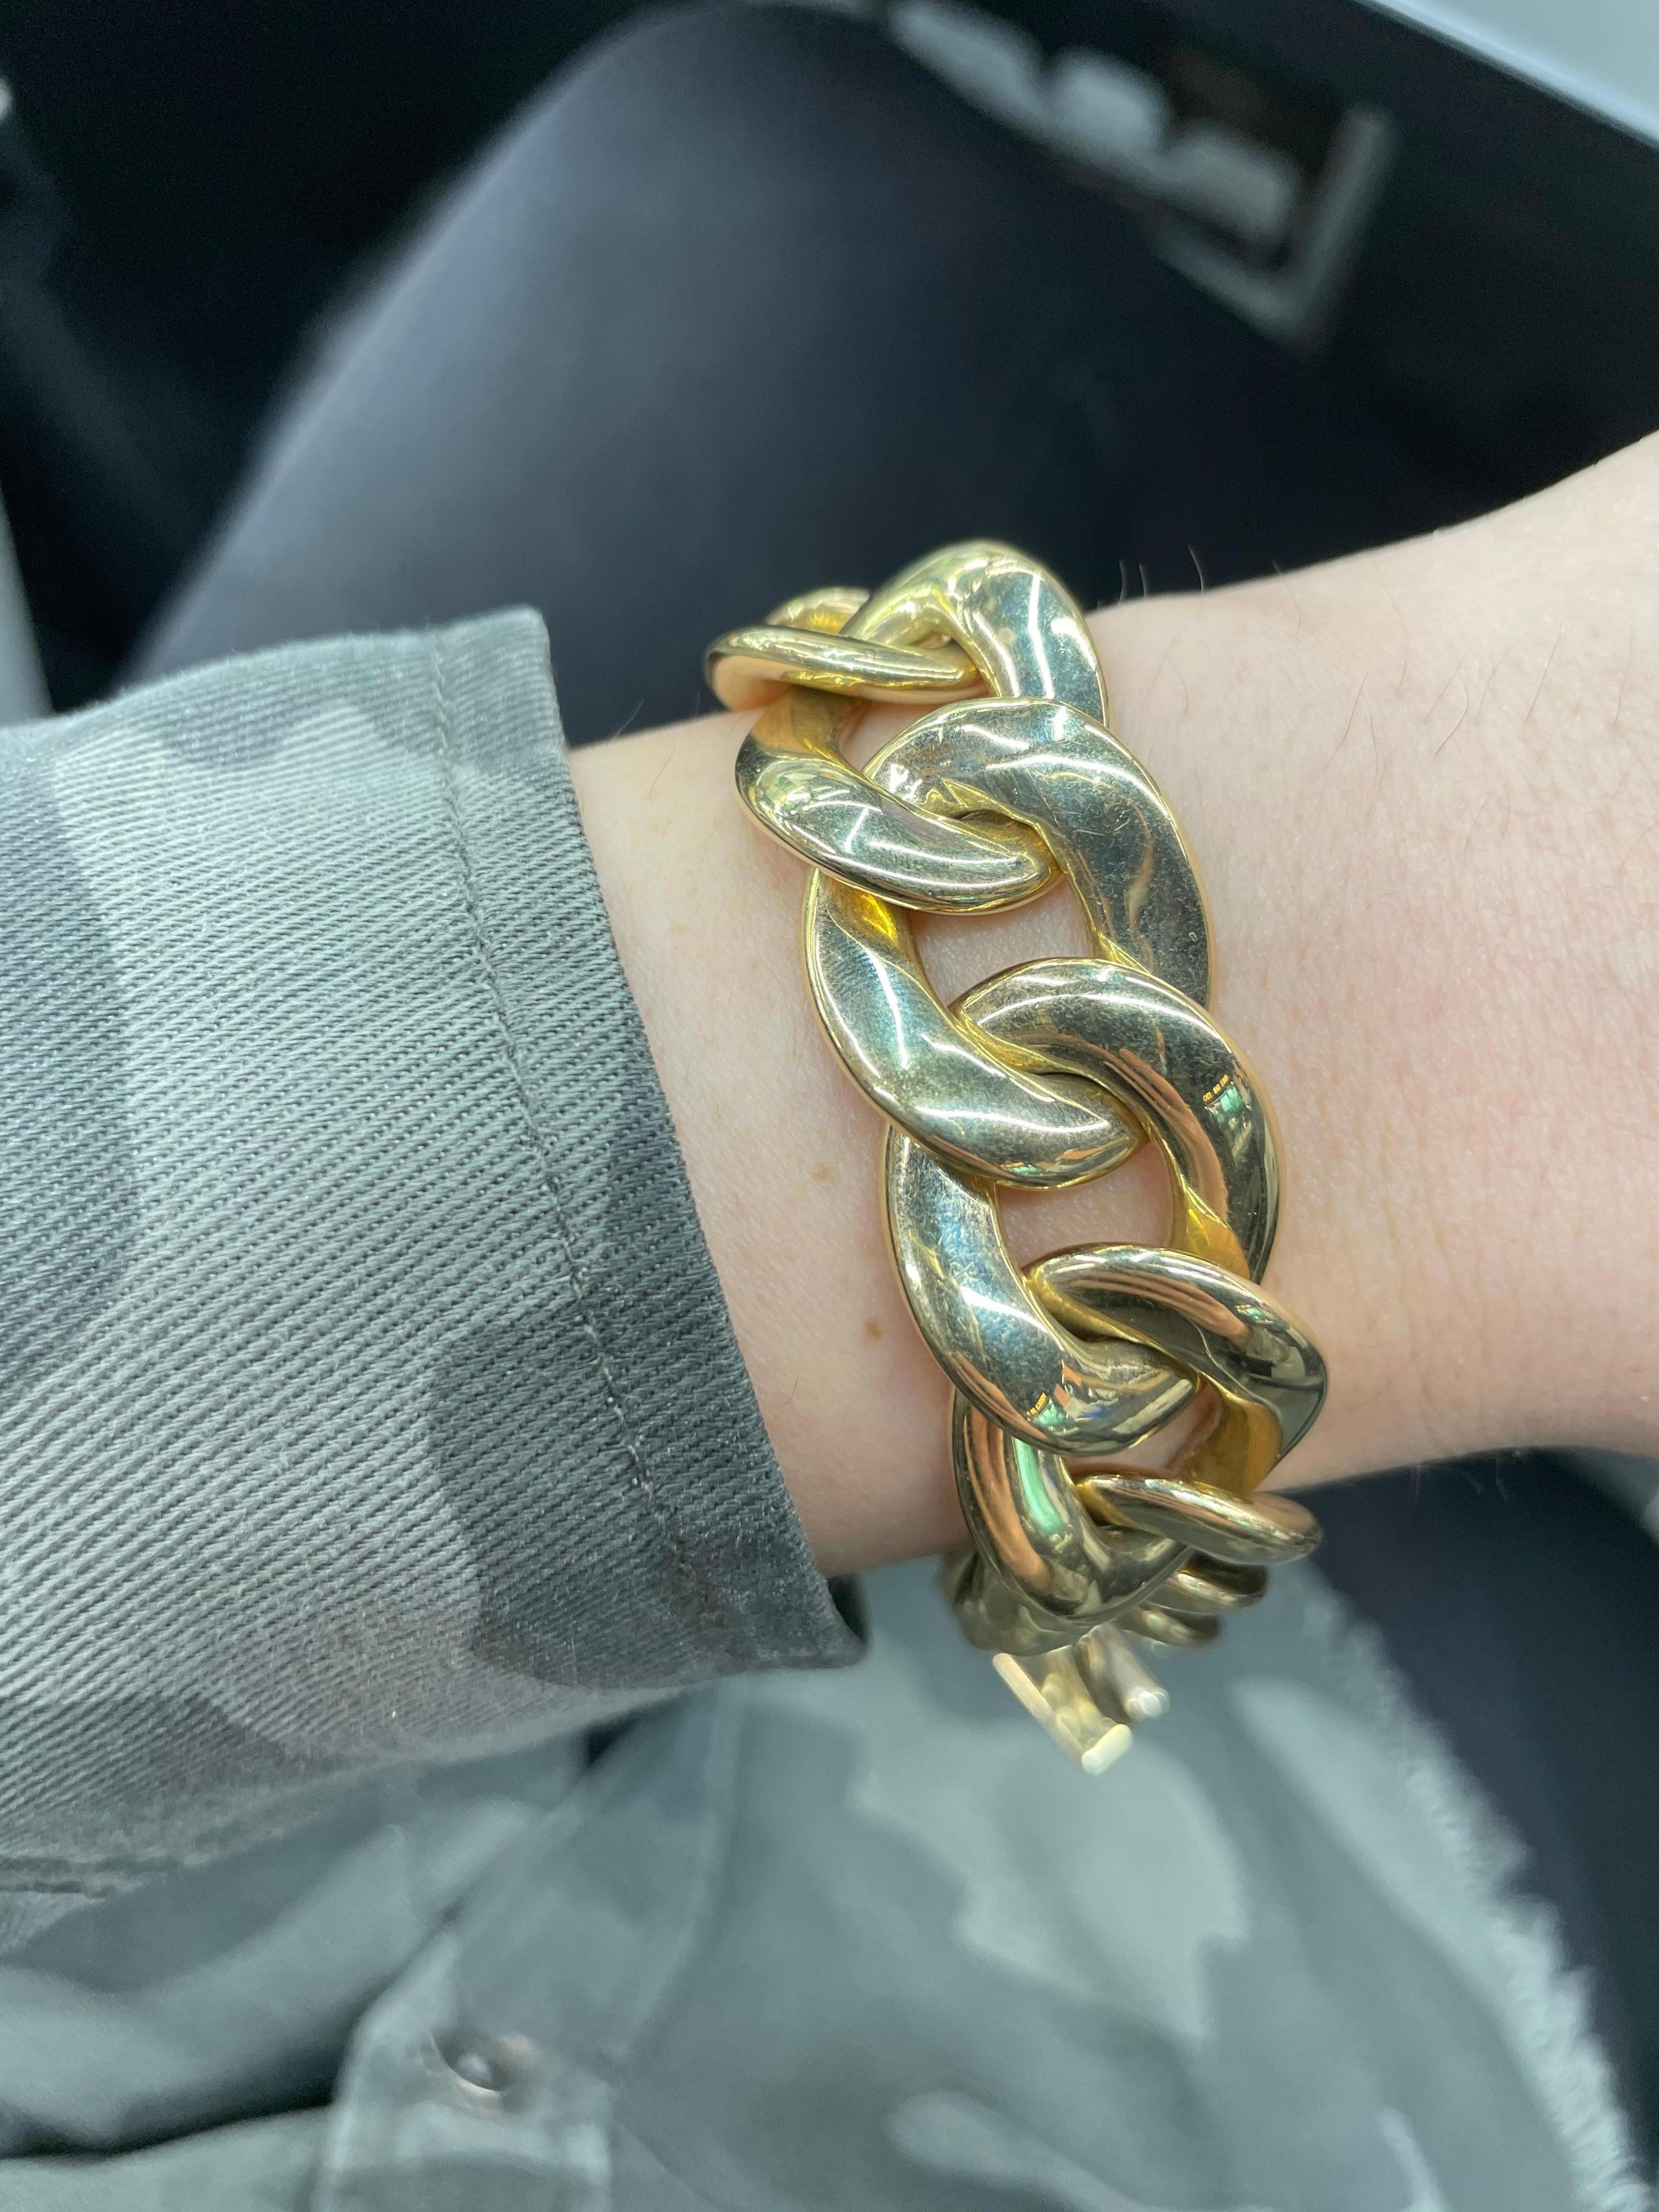 14 Karat yellow bracelet featuring 14 polished links weighing 50.6 grams. 
Very comfortable on the wrist!
More link bracelets available in 14 & 18 karat gold.